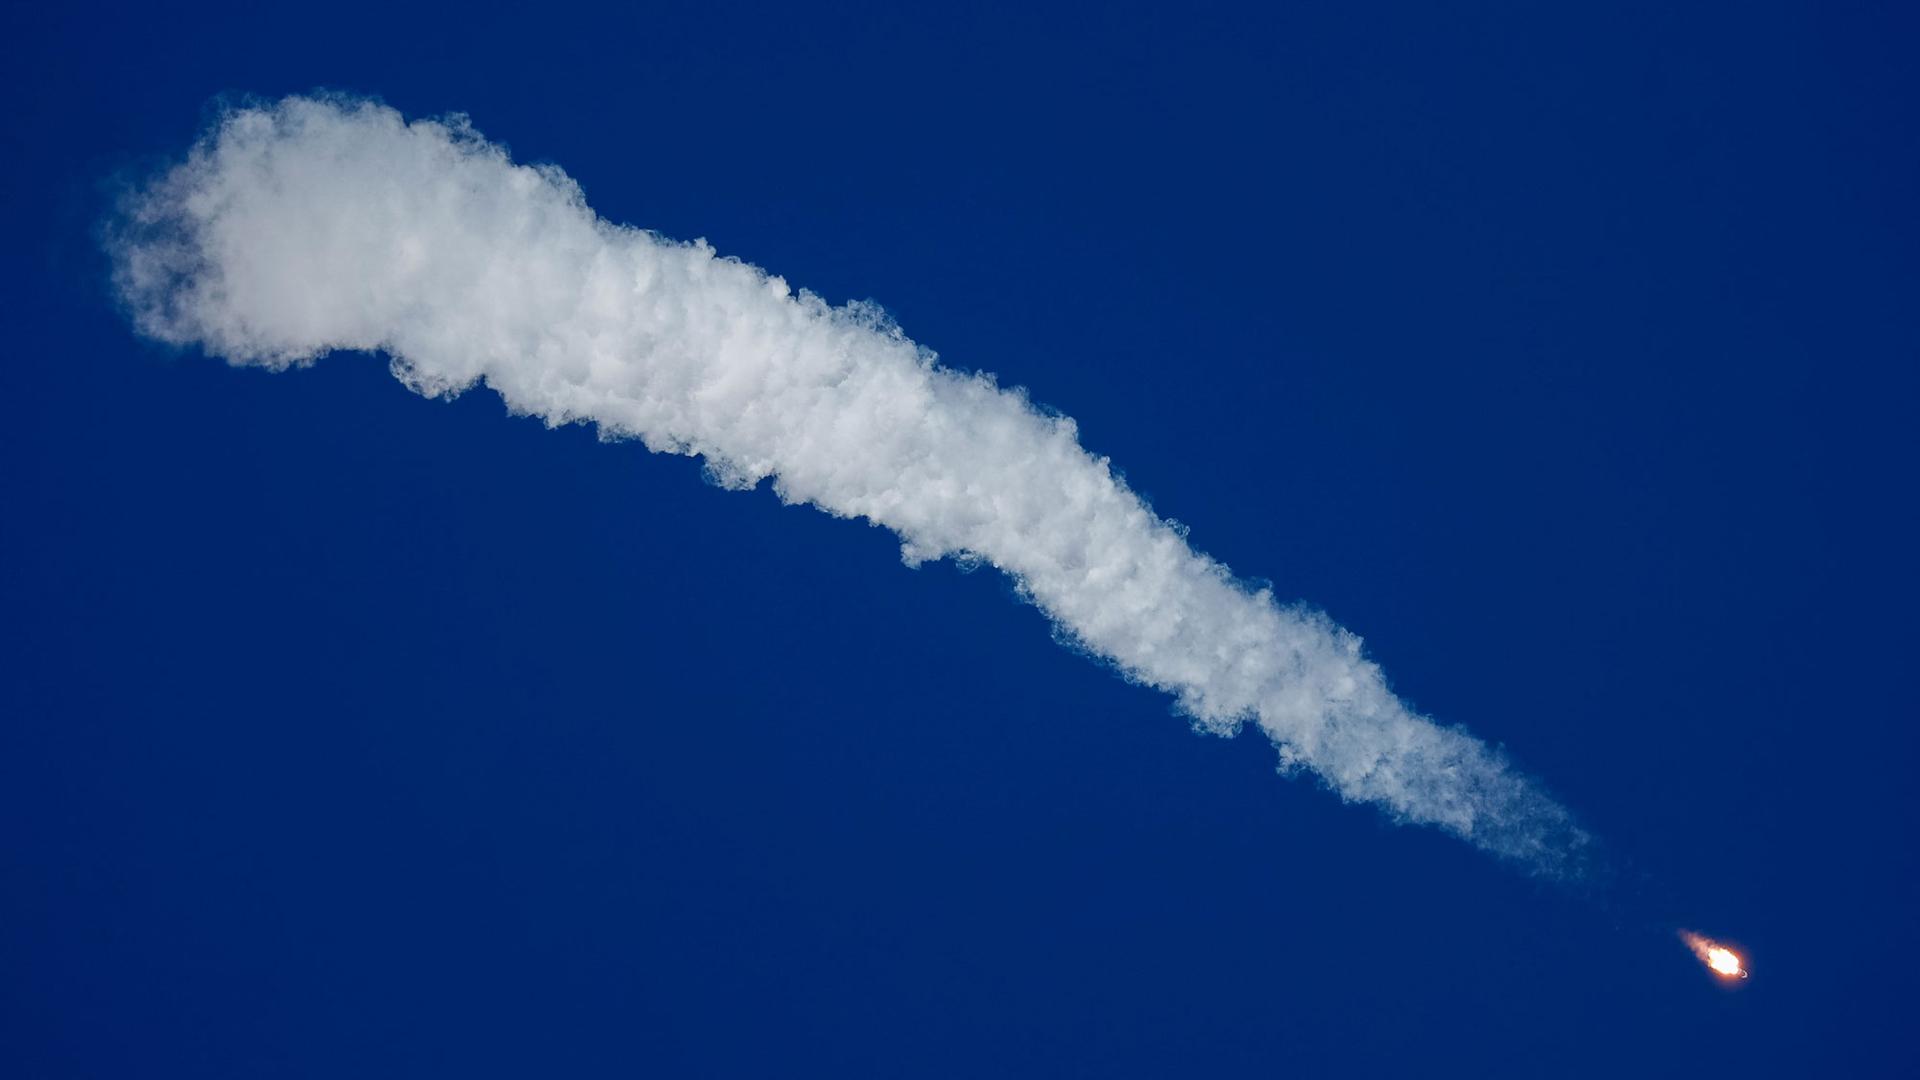 The Soyuz MS-10 spacecraft is shown streaking across the sky with a long white cloud of smoke trailing behind it.